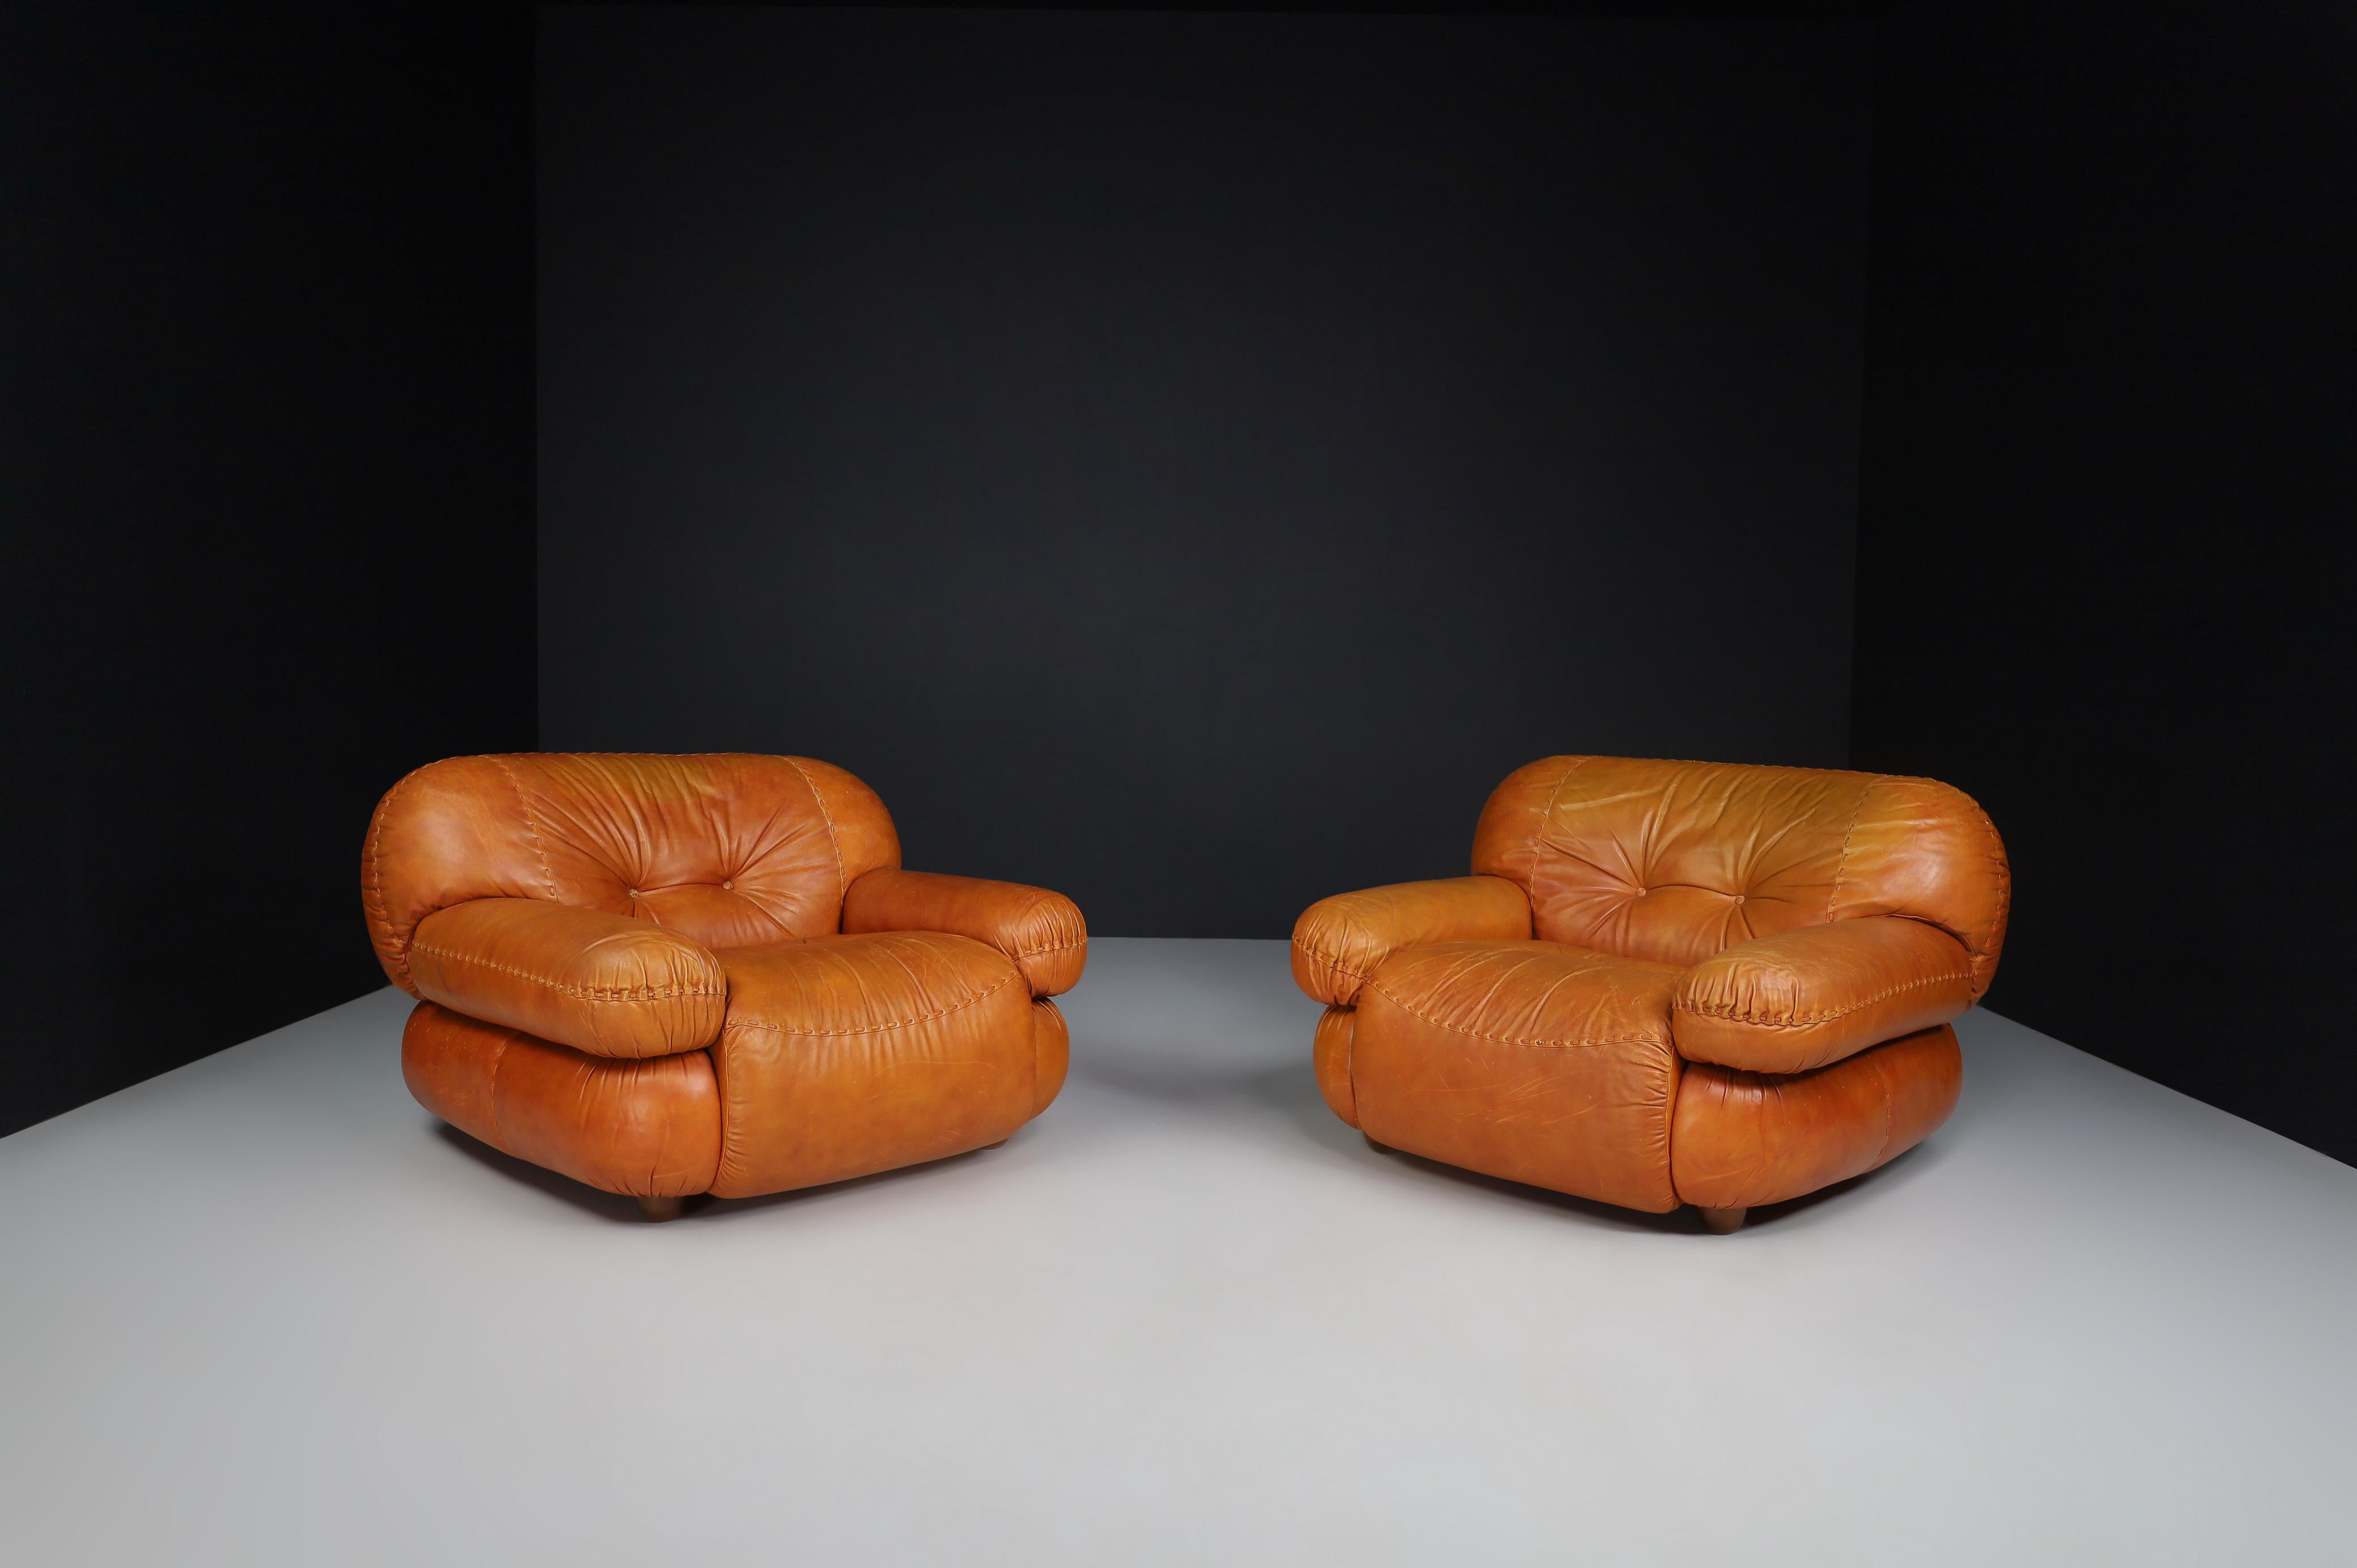 A pair of lounge chairs in cognac brown leather by Sapporo for Mobil Girgi, Italy, in the 1970s. 

Pair of big, fluffy, stylish lounge armchairs that feature round lines and shapes invite you to take a seat and relax—designed by Sapporo for Mobil